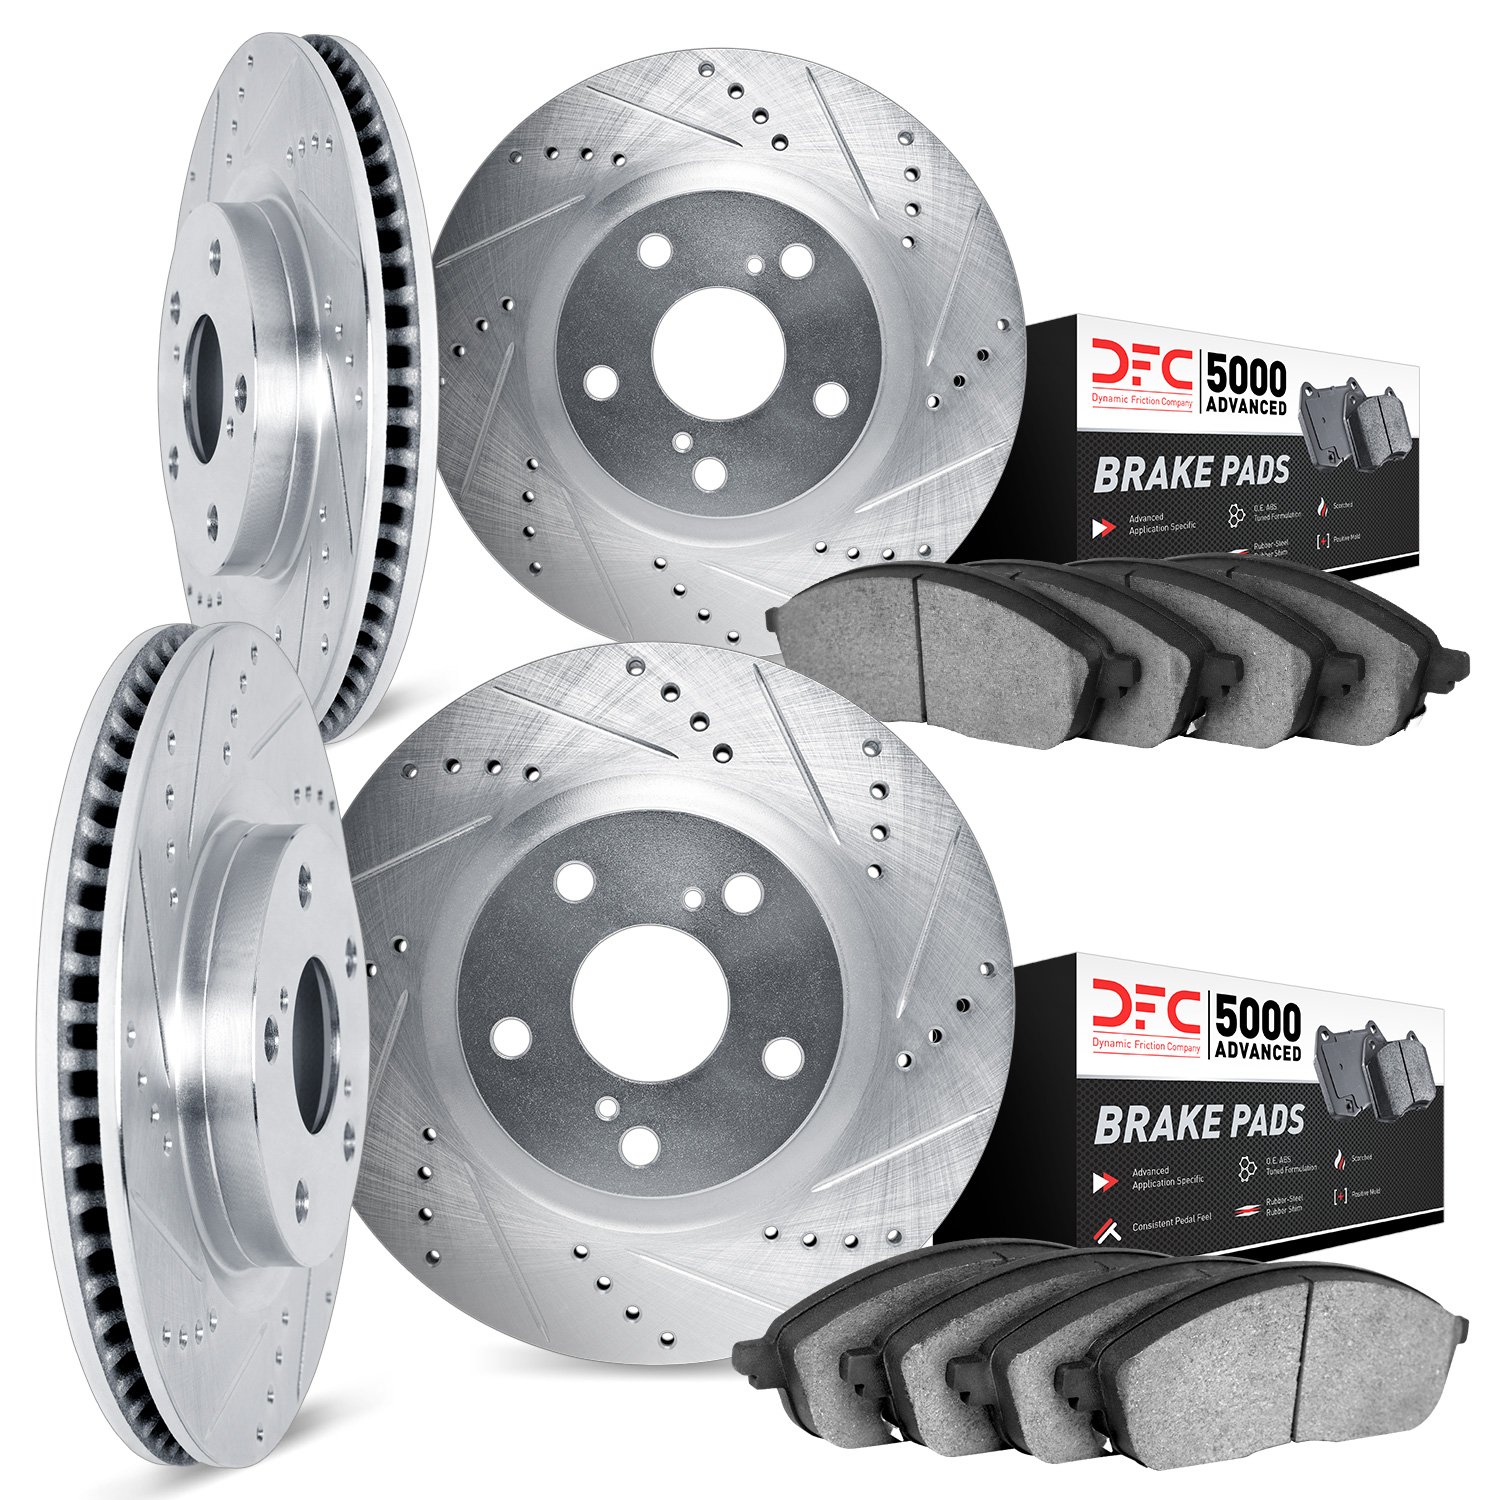 7504-31080 Drilled/Slotted Brake Rotors w/5000 Advanced Brake Pads Kit [Silver], Fits Select BMW, Position: Front and Rear